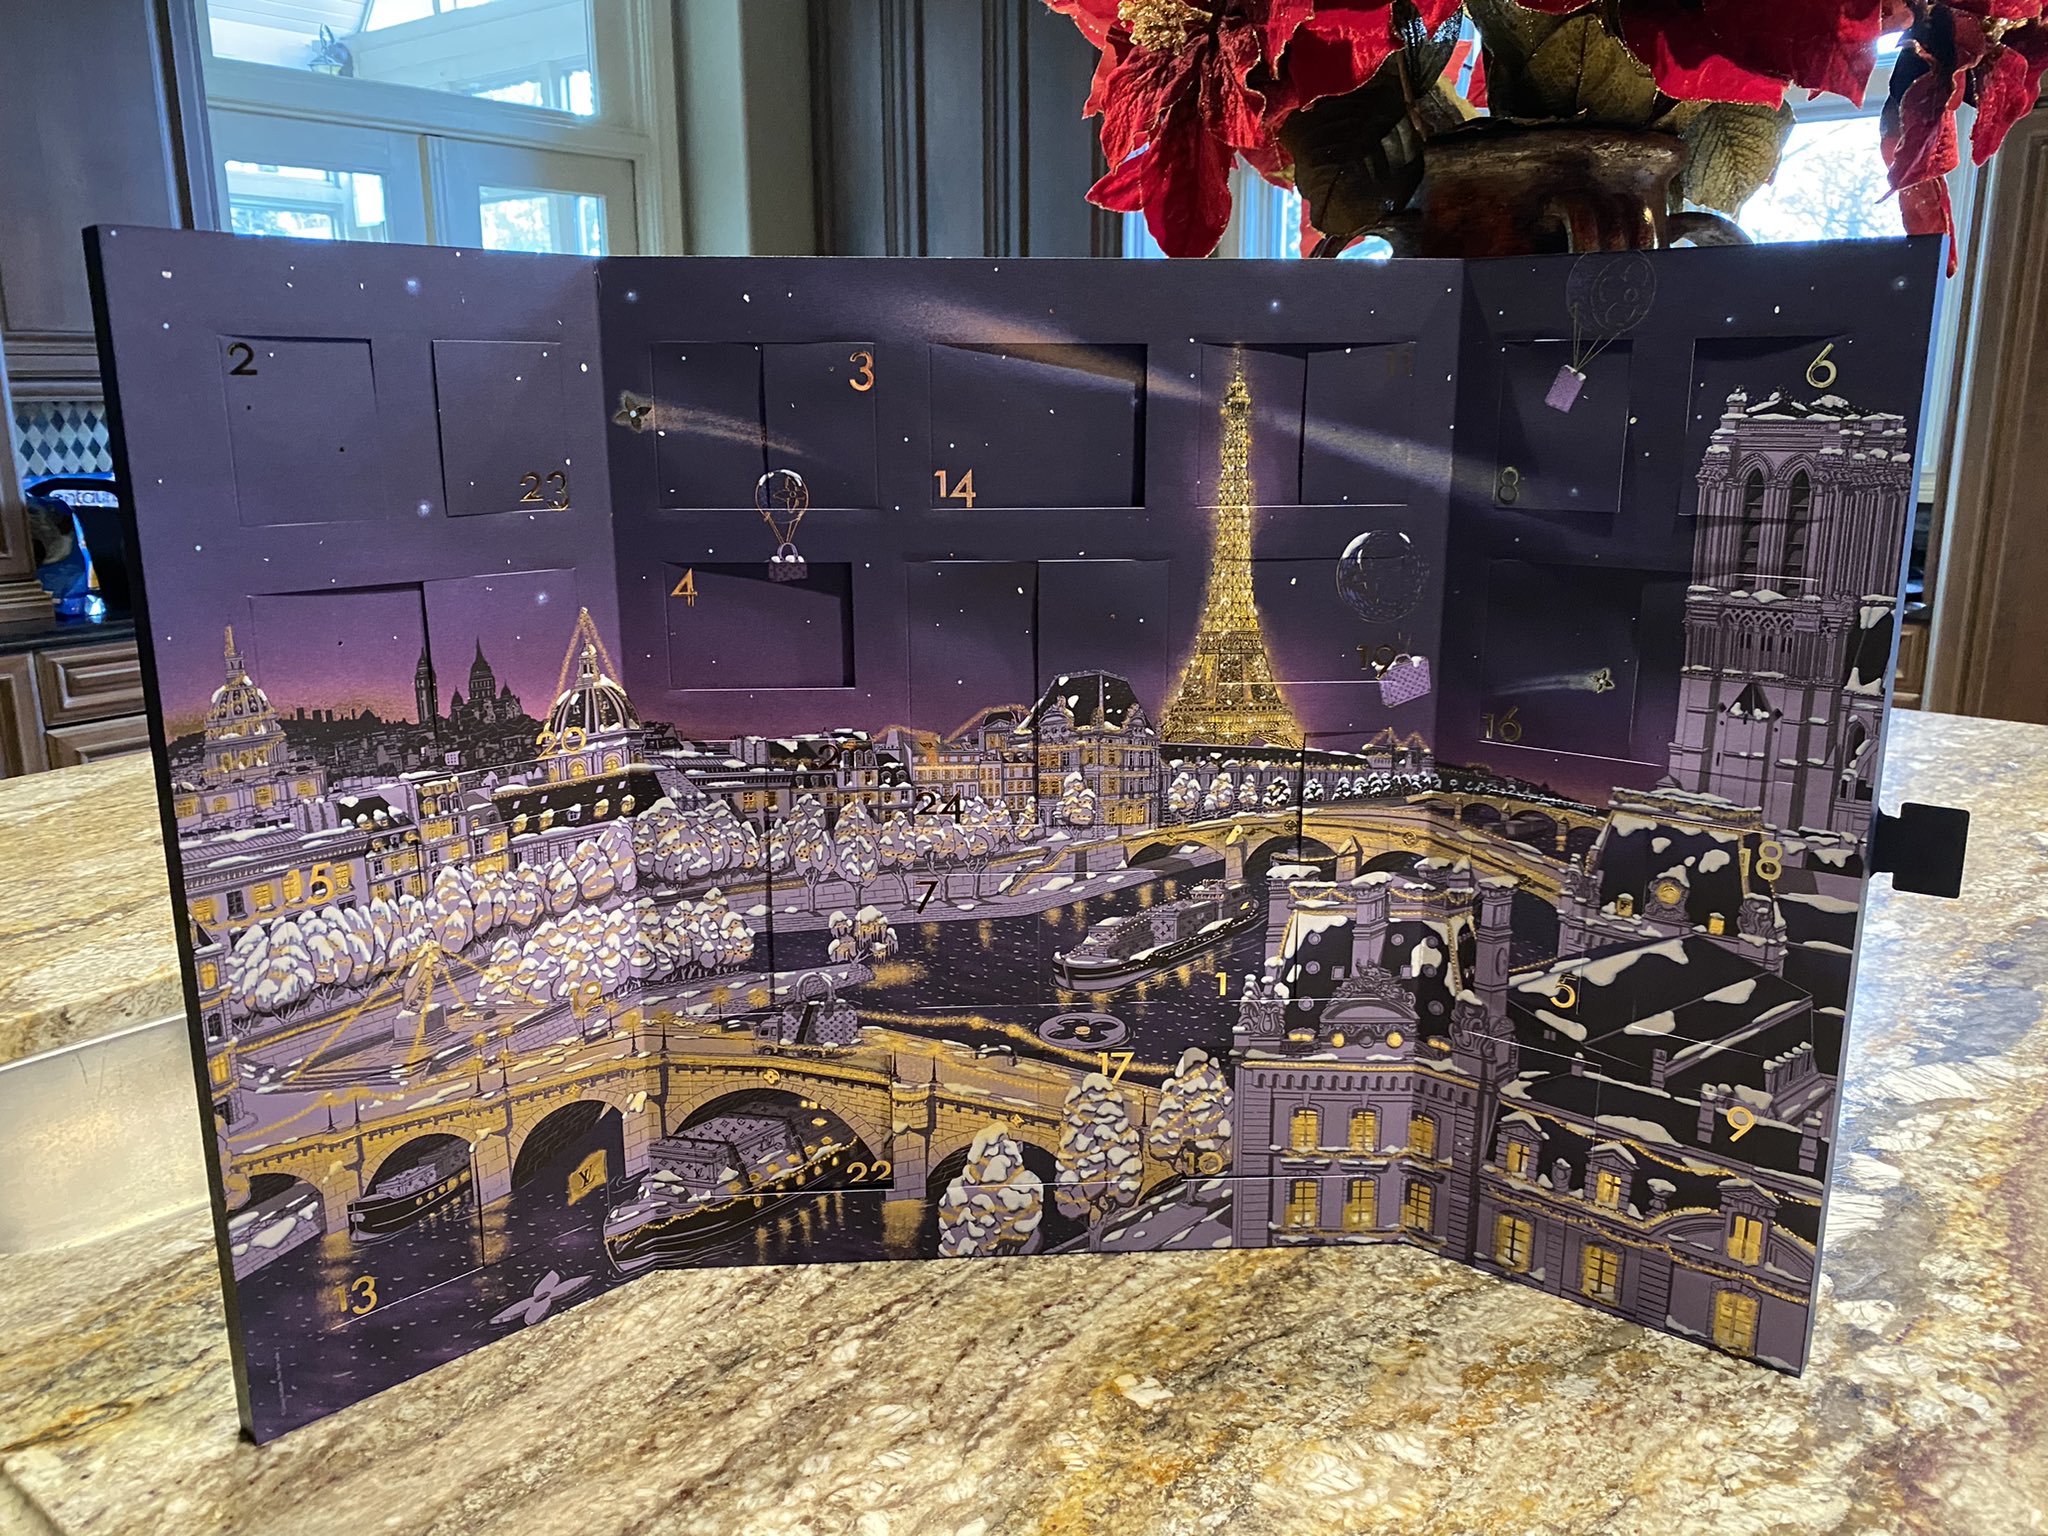 unboxing the @Louis Vuitton advent calendar 2022! love this year's